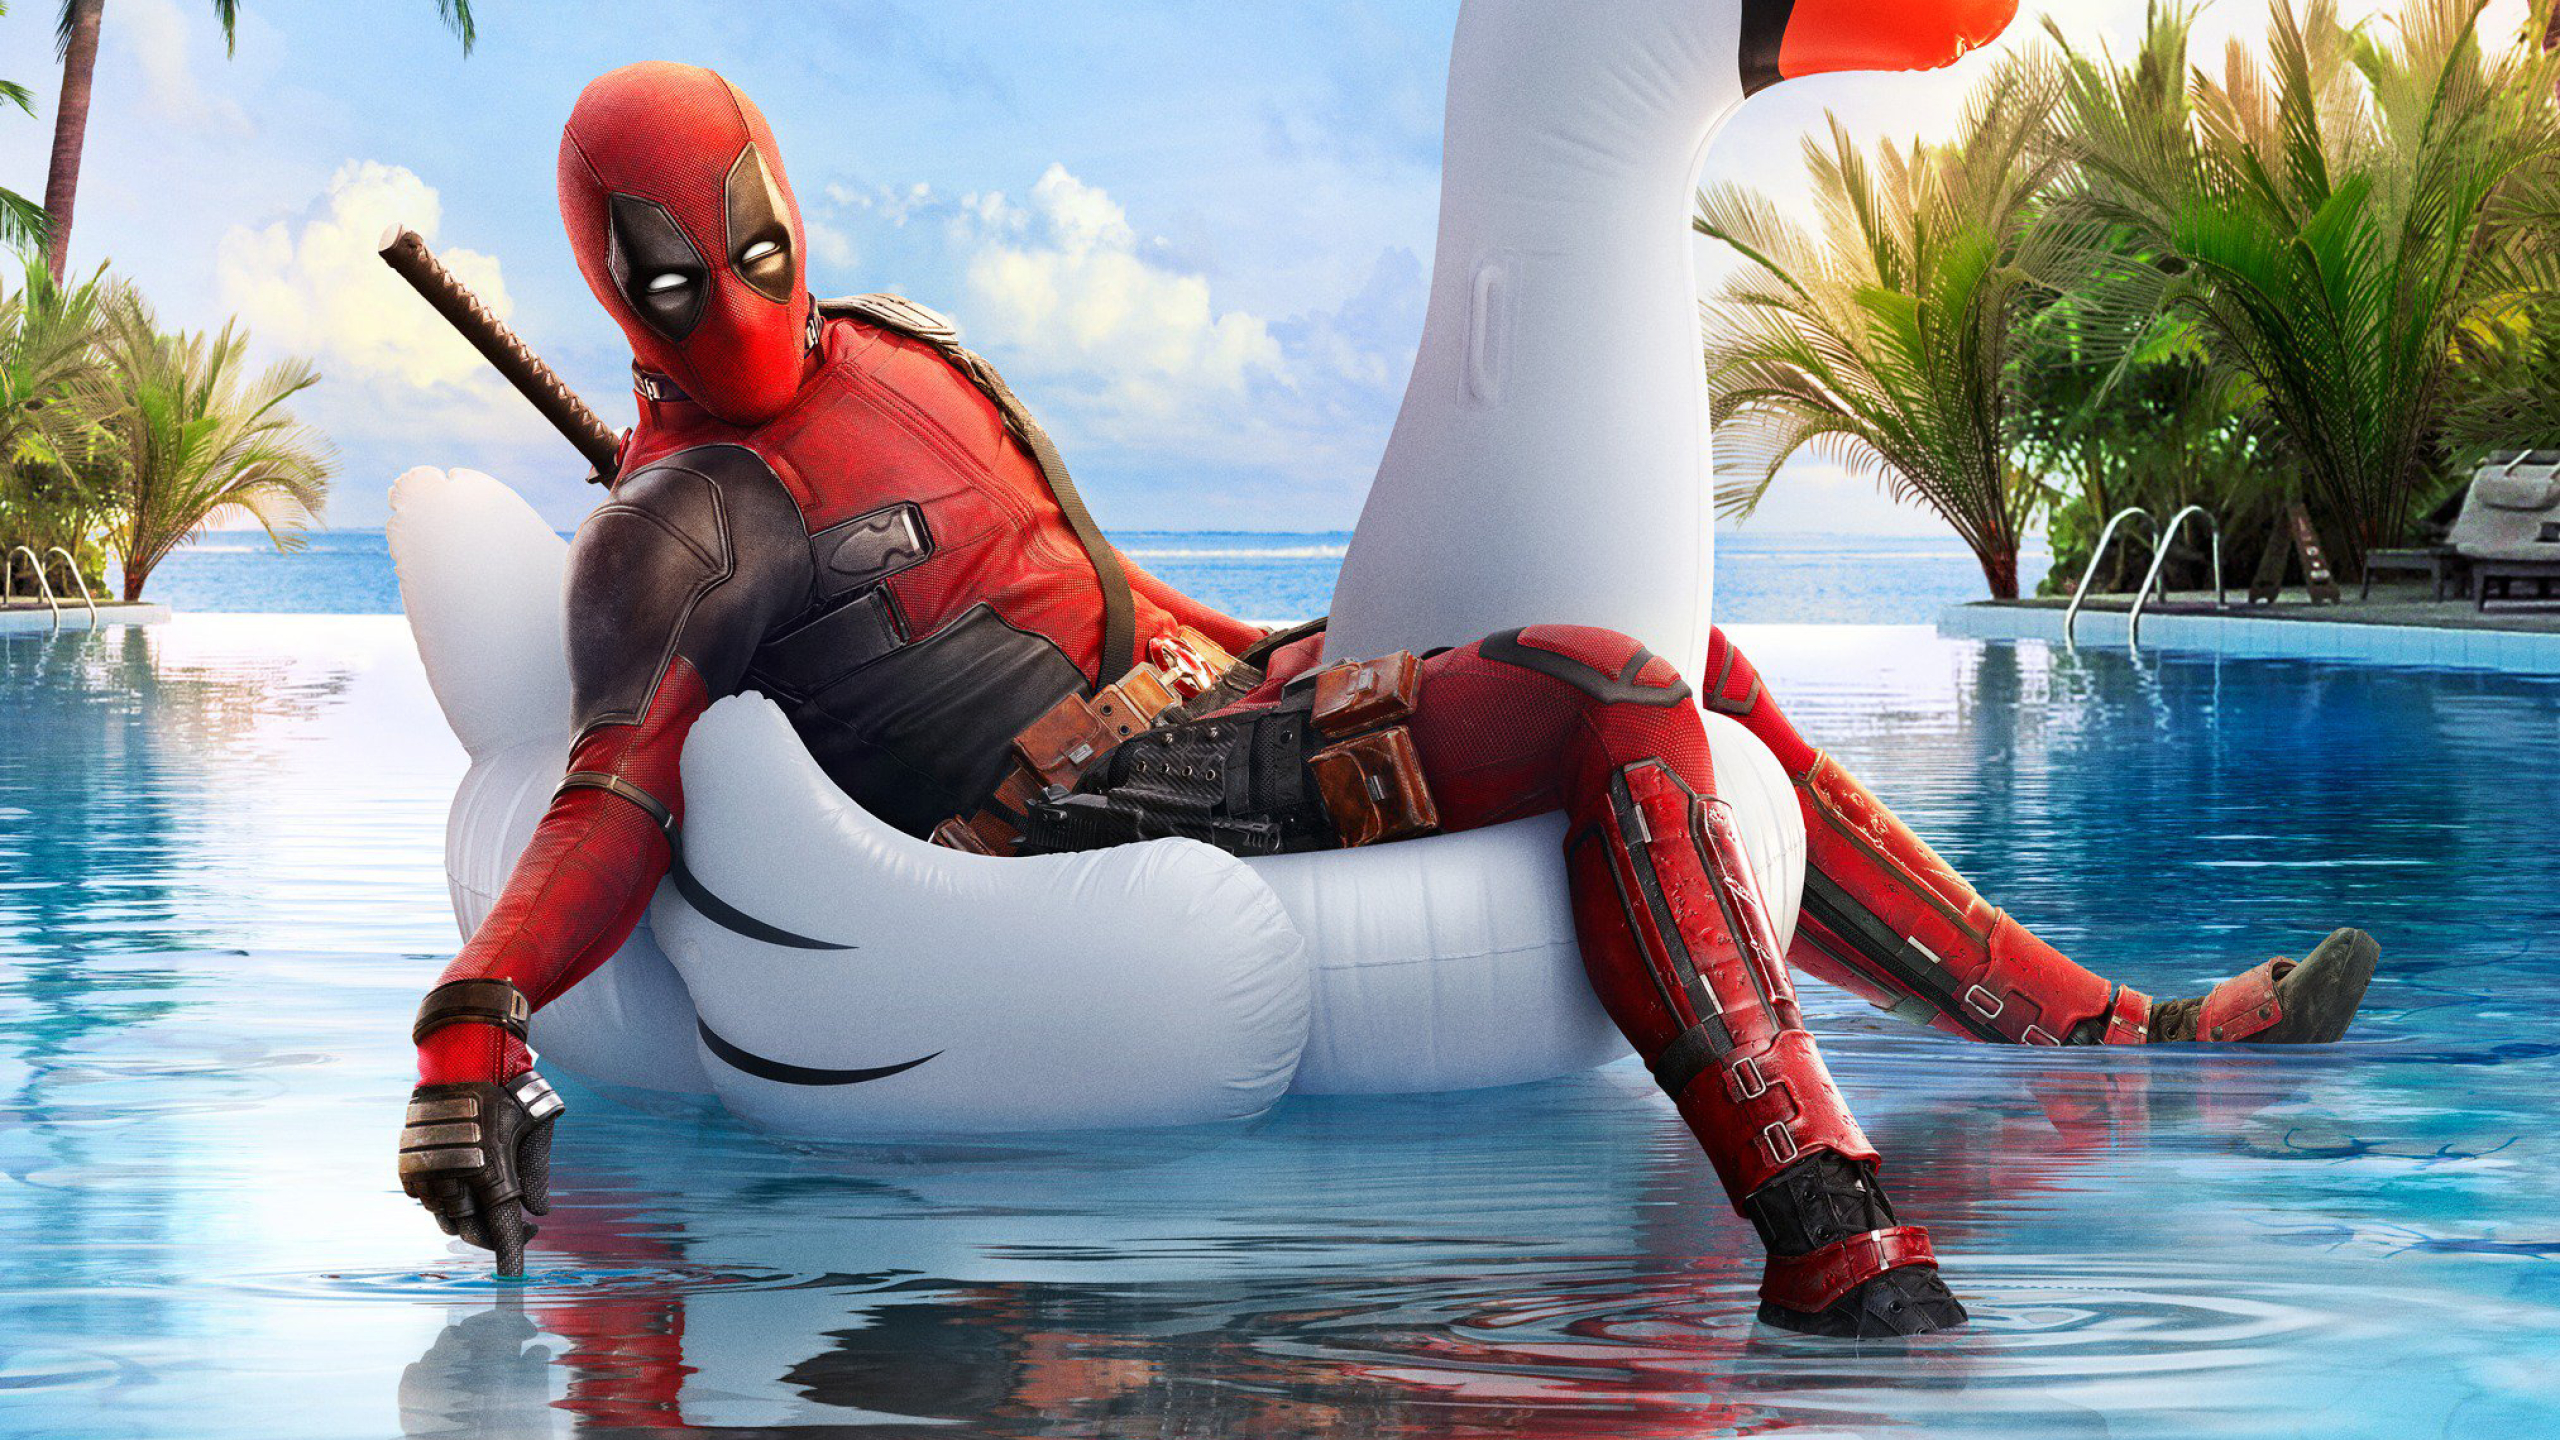 2560x1440 Deadpool 2 Funny Poster 1440P Resolution Wallpaper, HD Movies